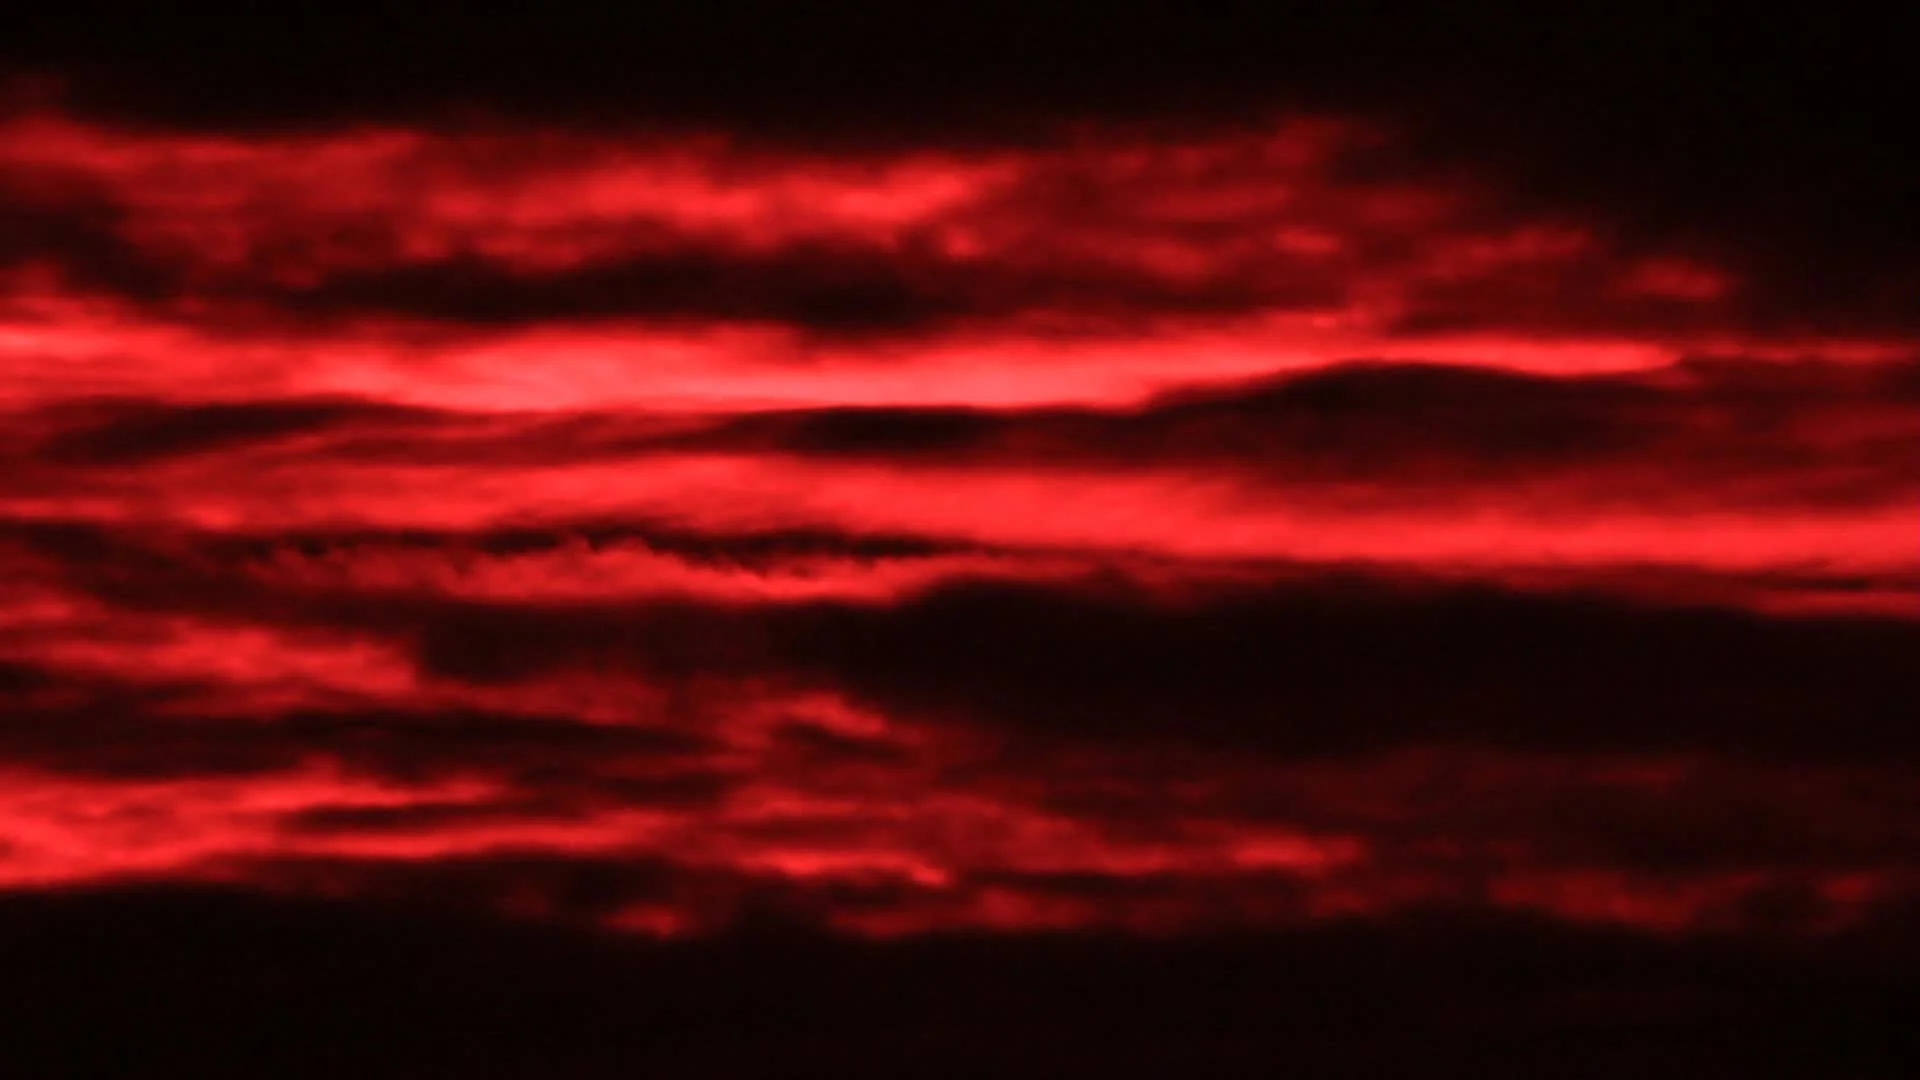 Wallpaper Red and Black Clouds During Night Time Background  Download  Free Image